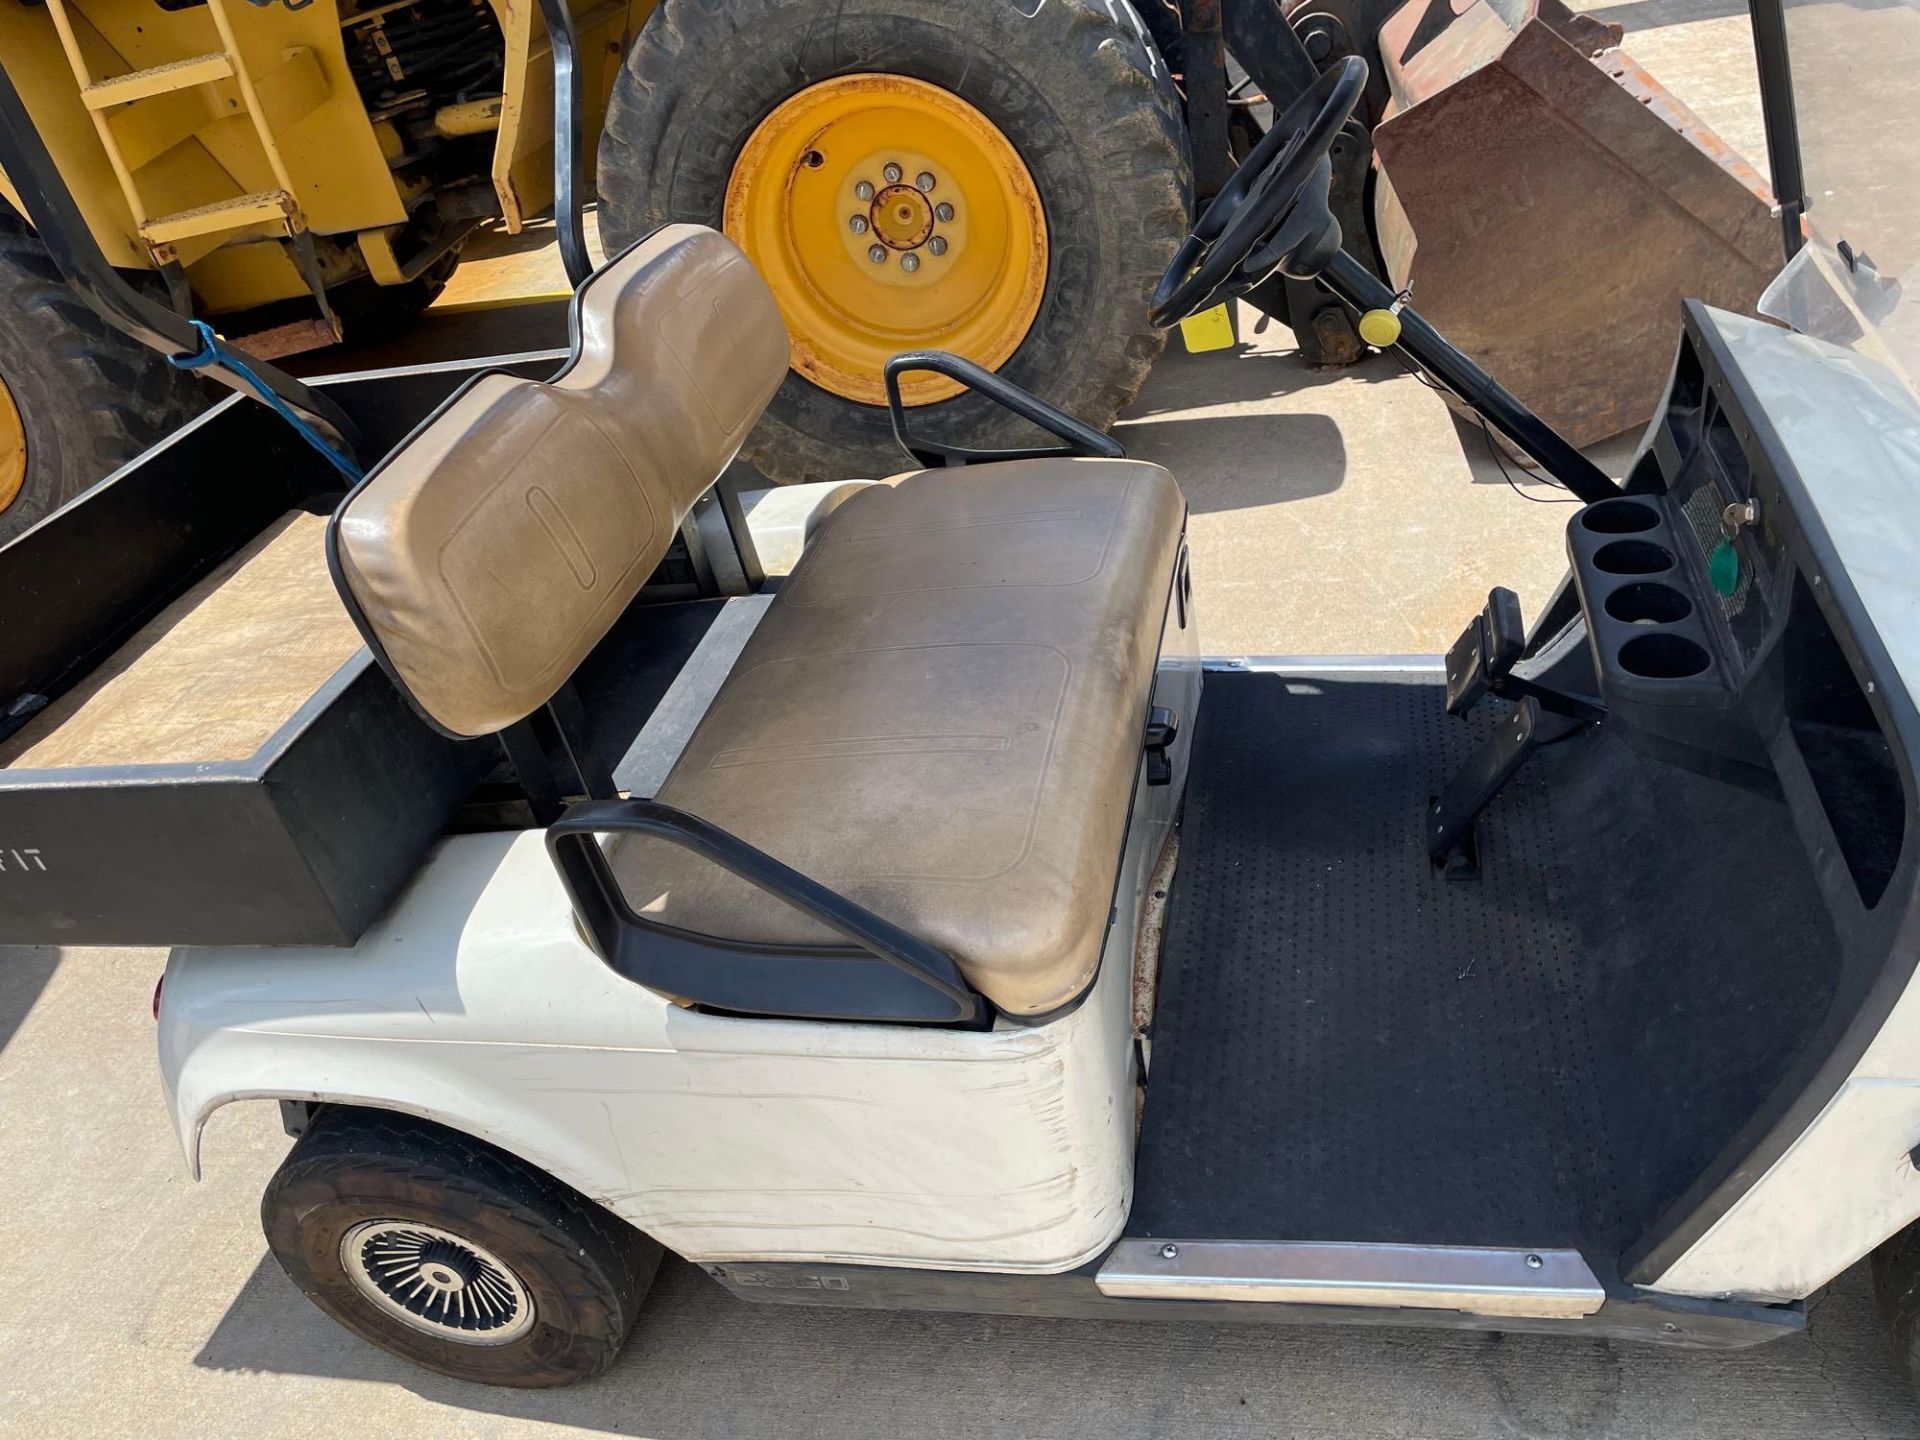 EZ-GO Cart with Rear Tool Box, Folding Front Windshield - Image 3 of 6